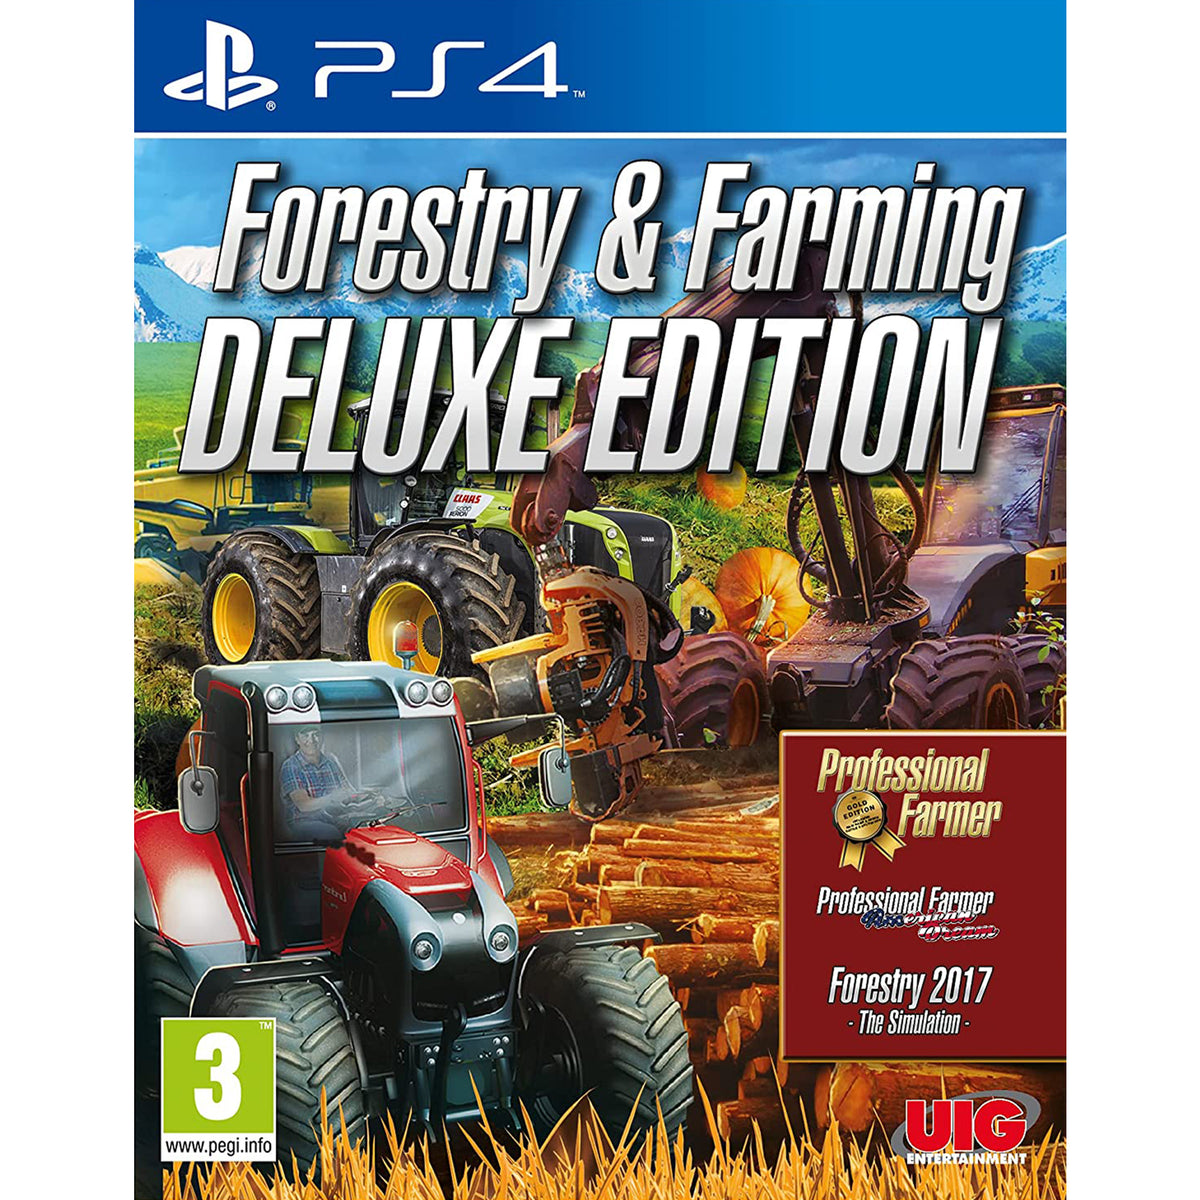 Farmer & Forestry Bundle PS4 – Entertainment Go's Deal Of Day!